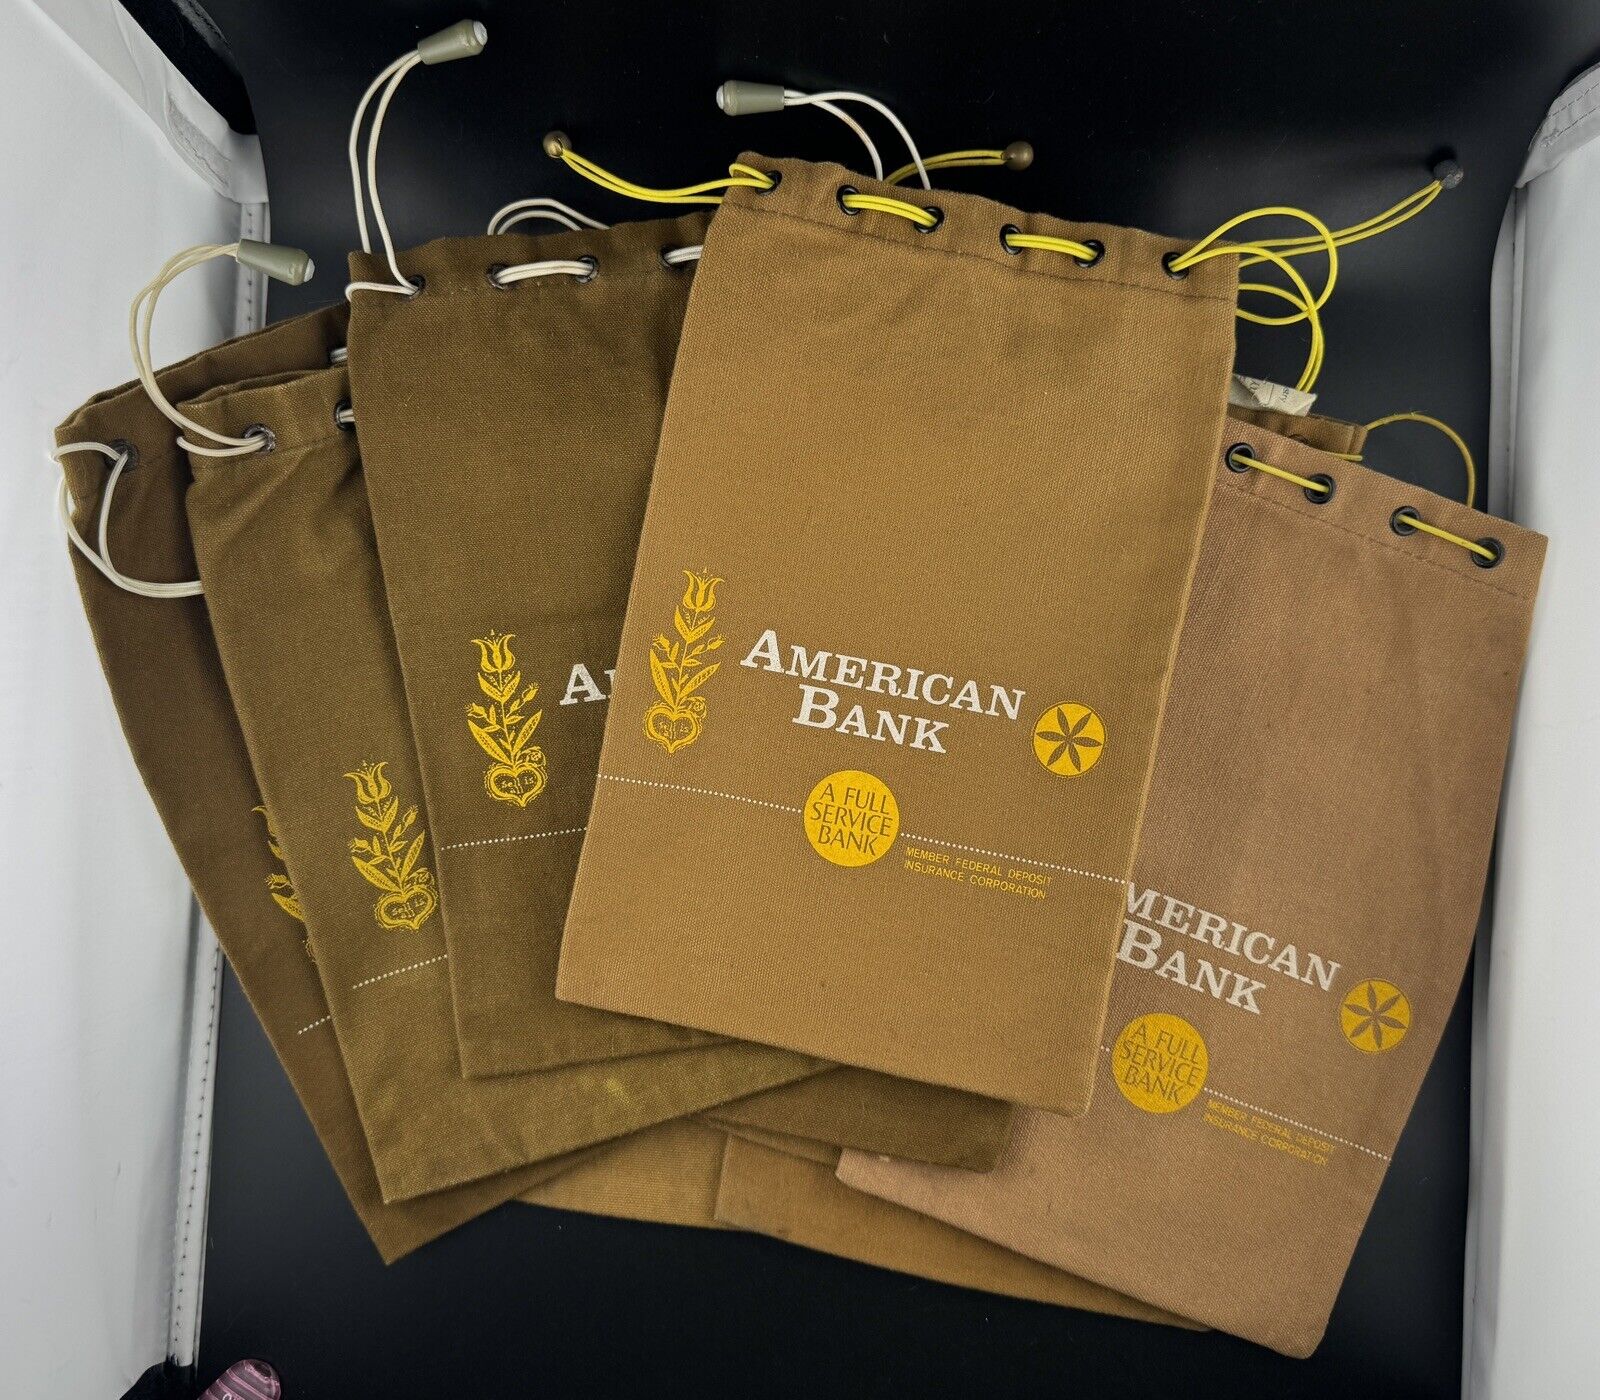 LOT of 9 Vintage “American Bank A Full Service Bank”Bags Brown 10”x6”